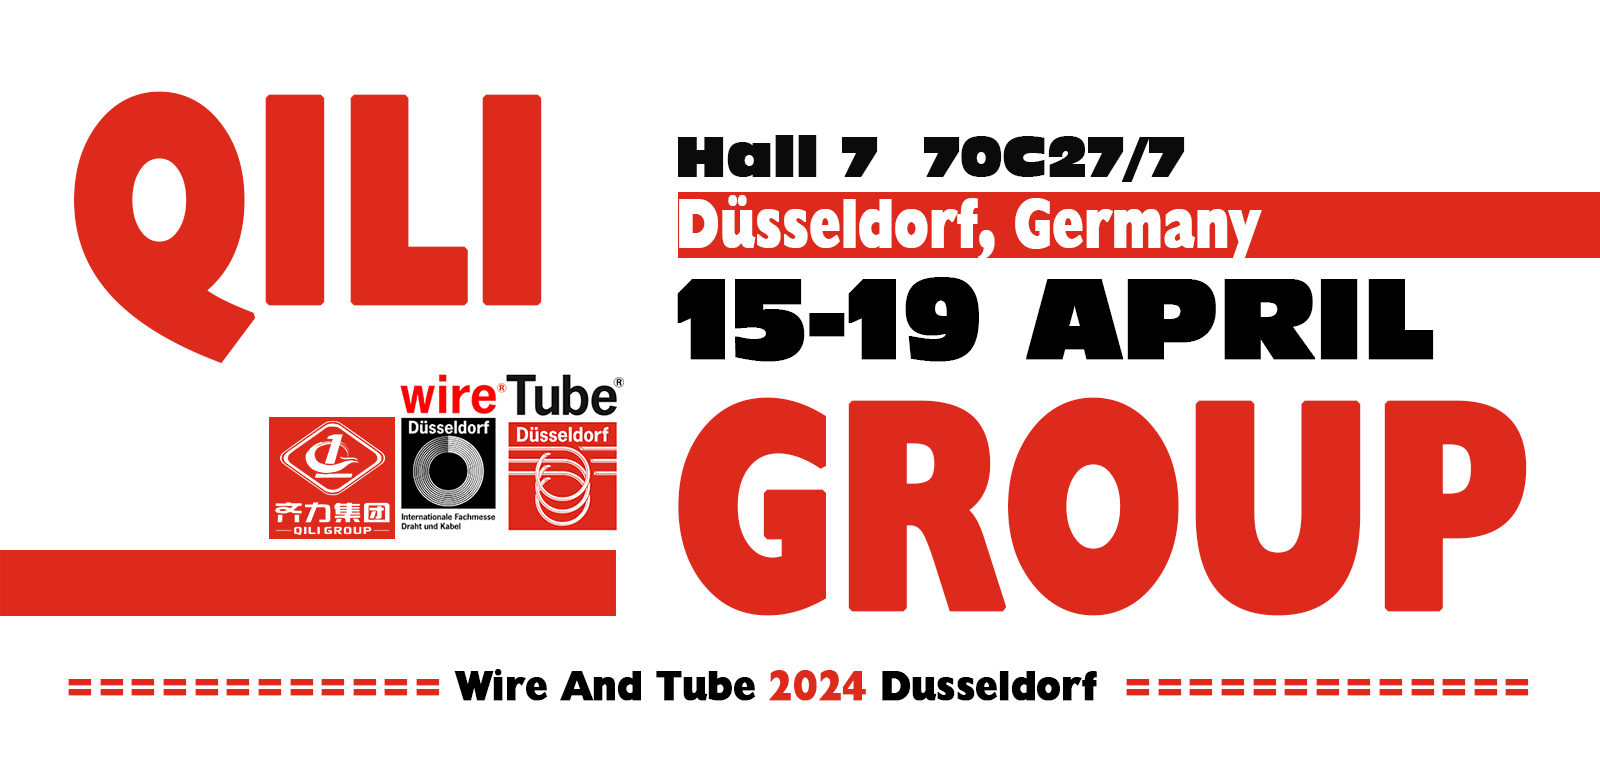 QILI will be attending Wire And Tube 2024 Dusseldorf